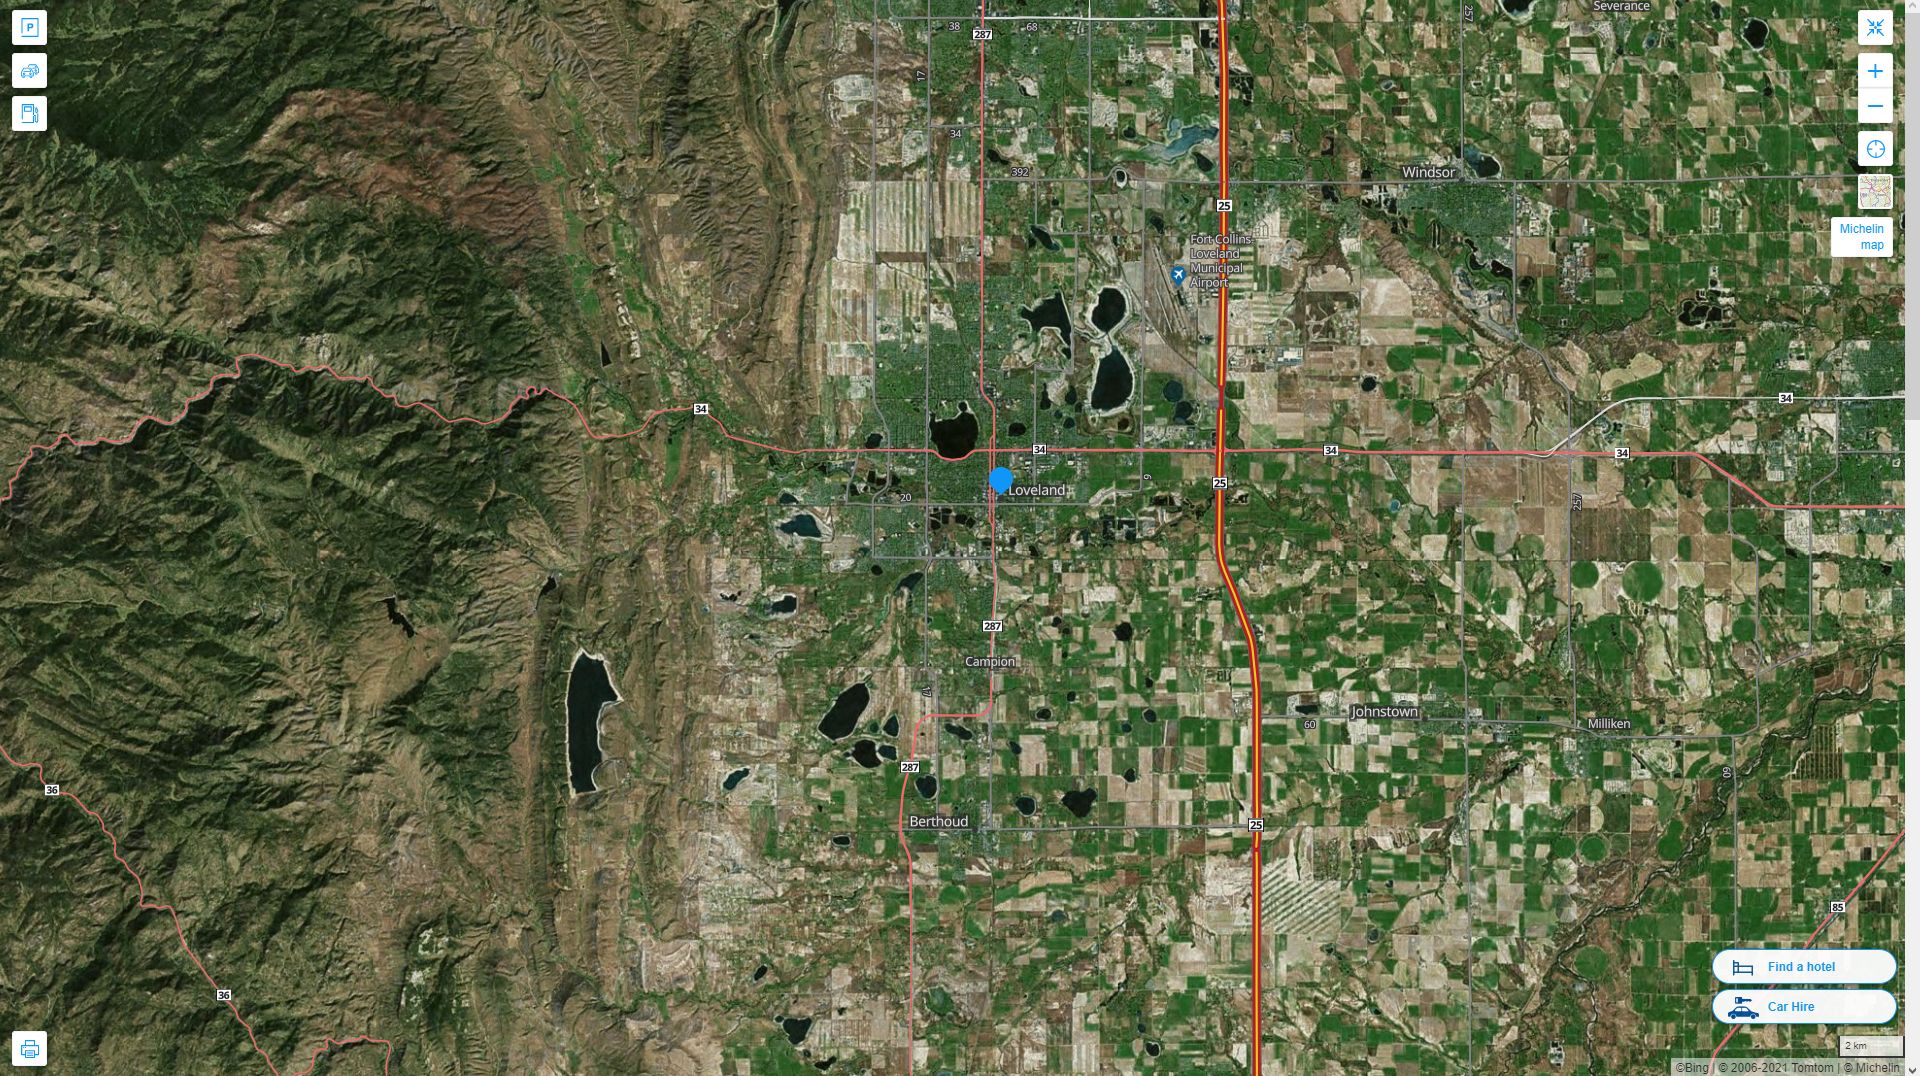 Loveland Colorado Highway and Road Map with Satellite View